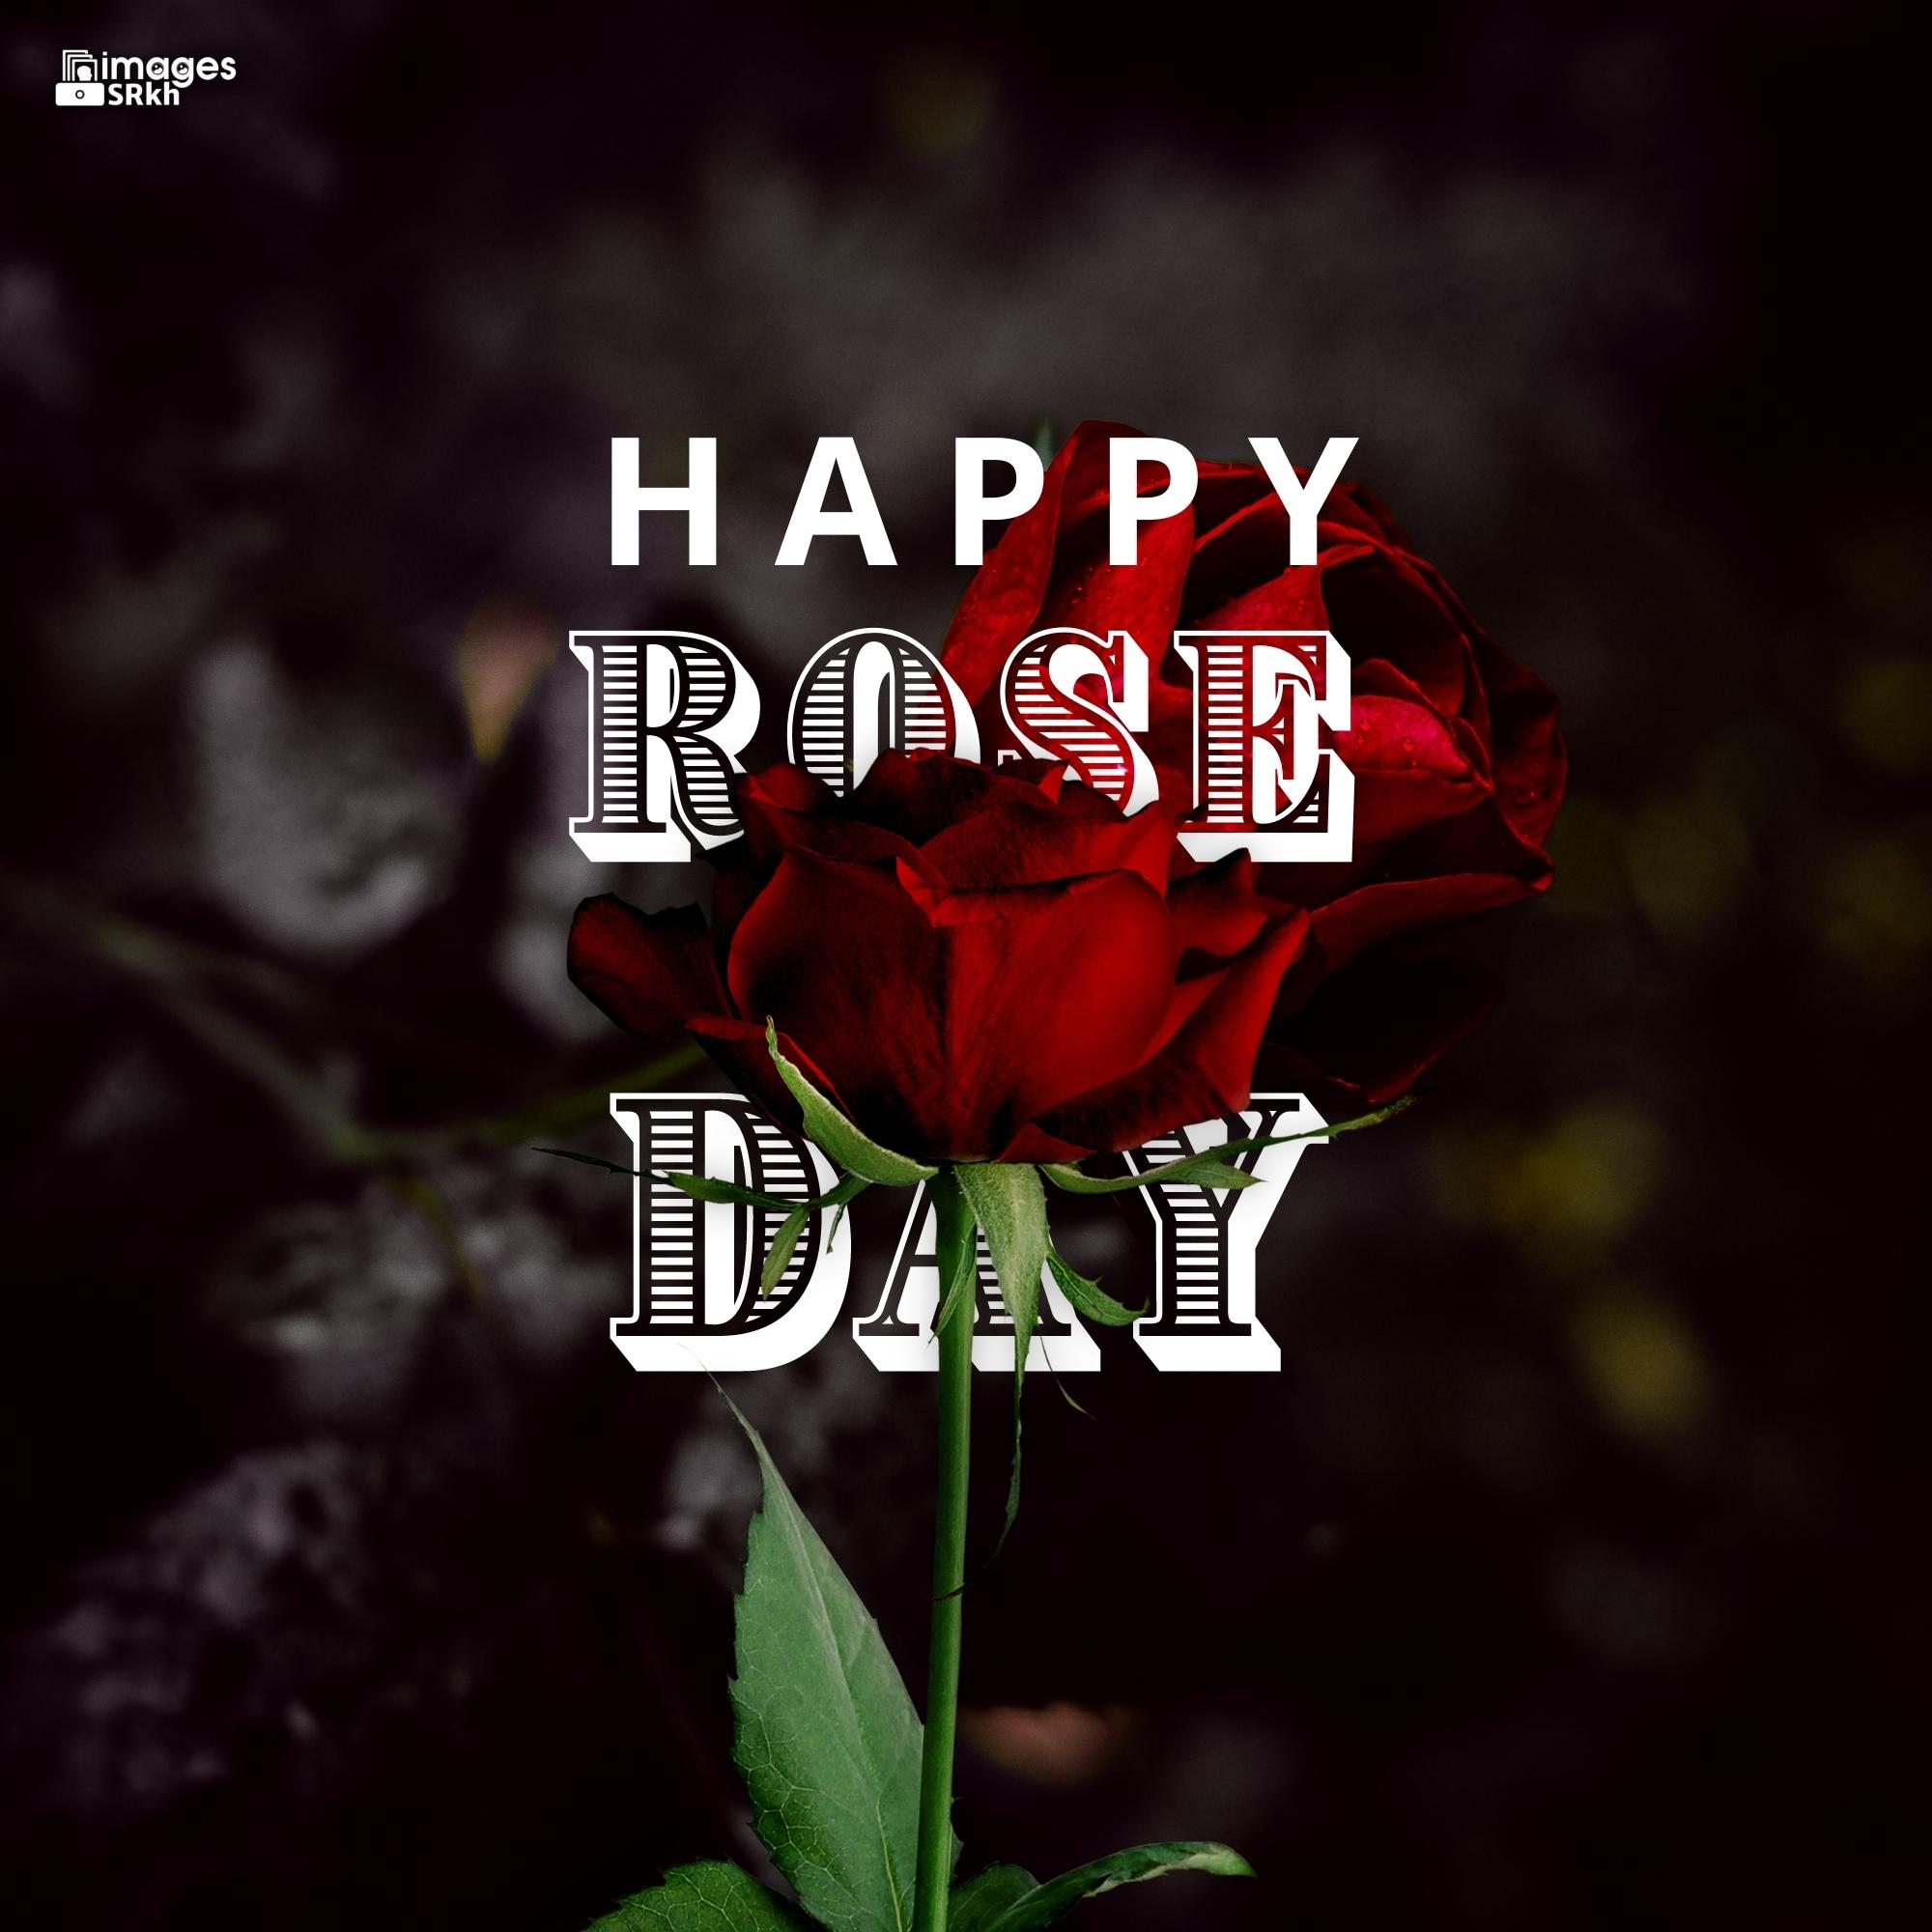 Happy Rose Day Image Hd Download (60)